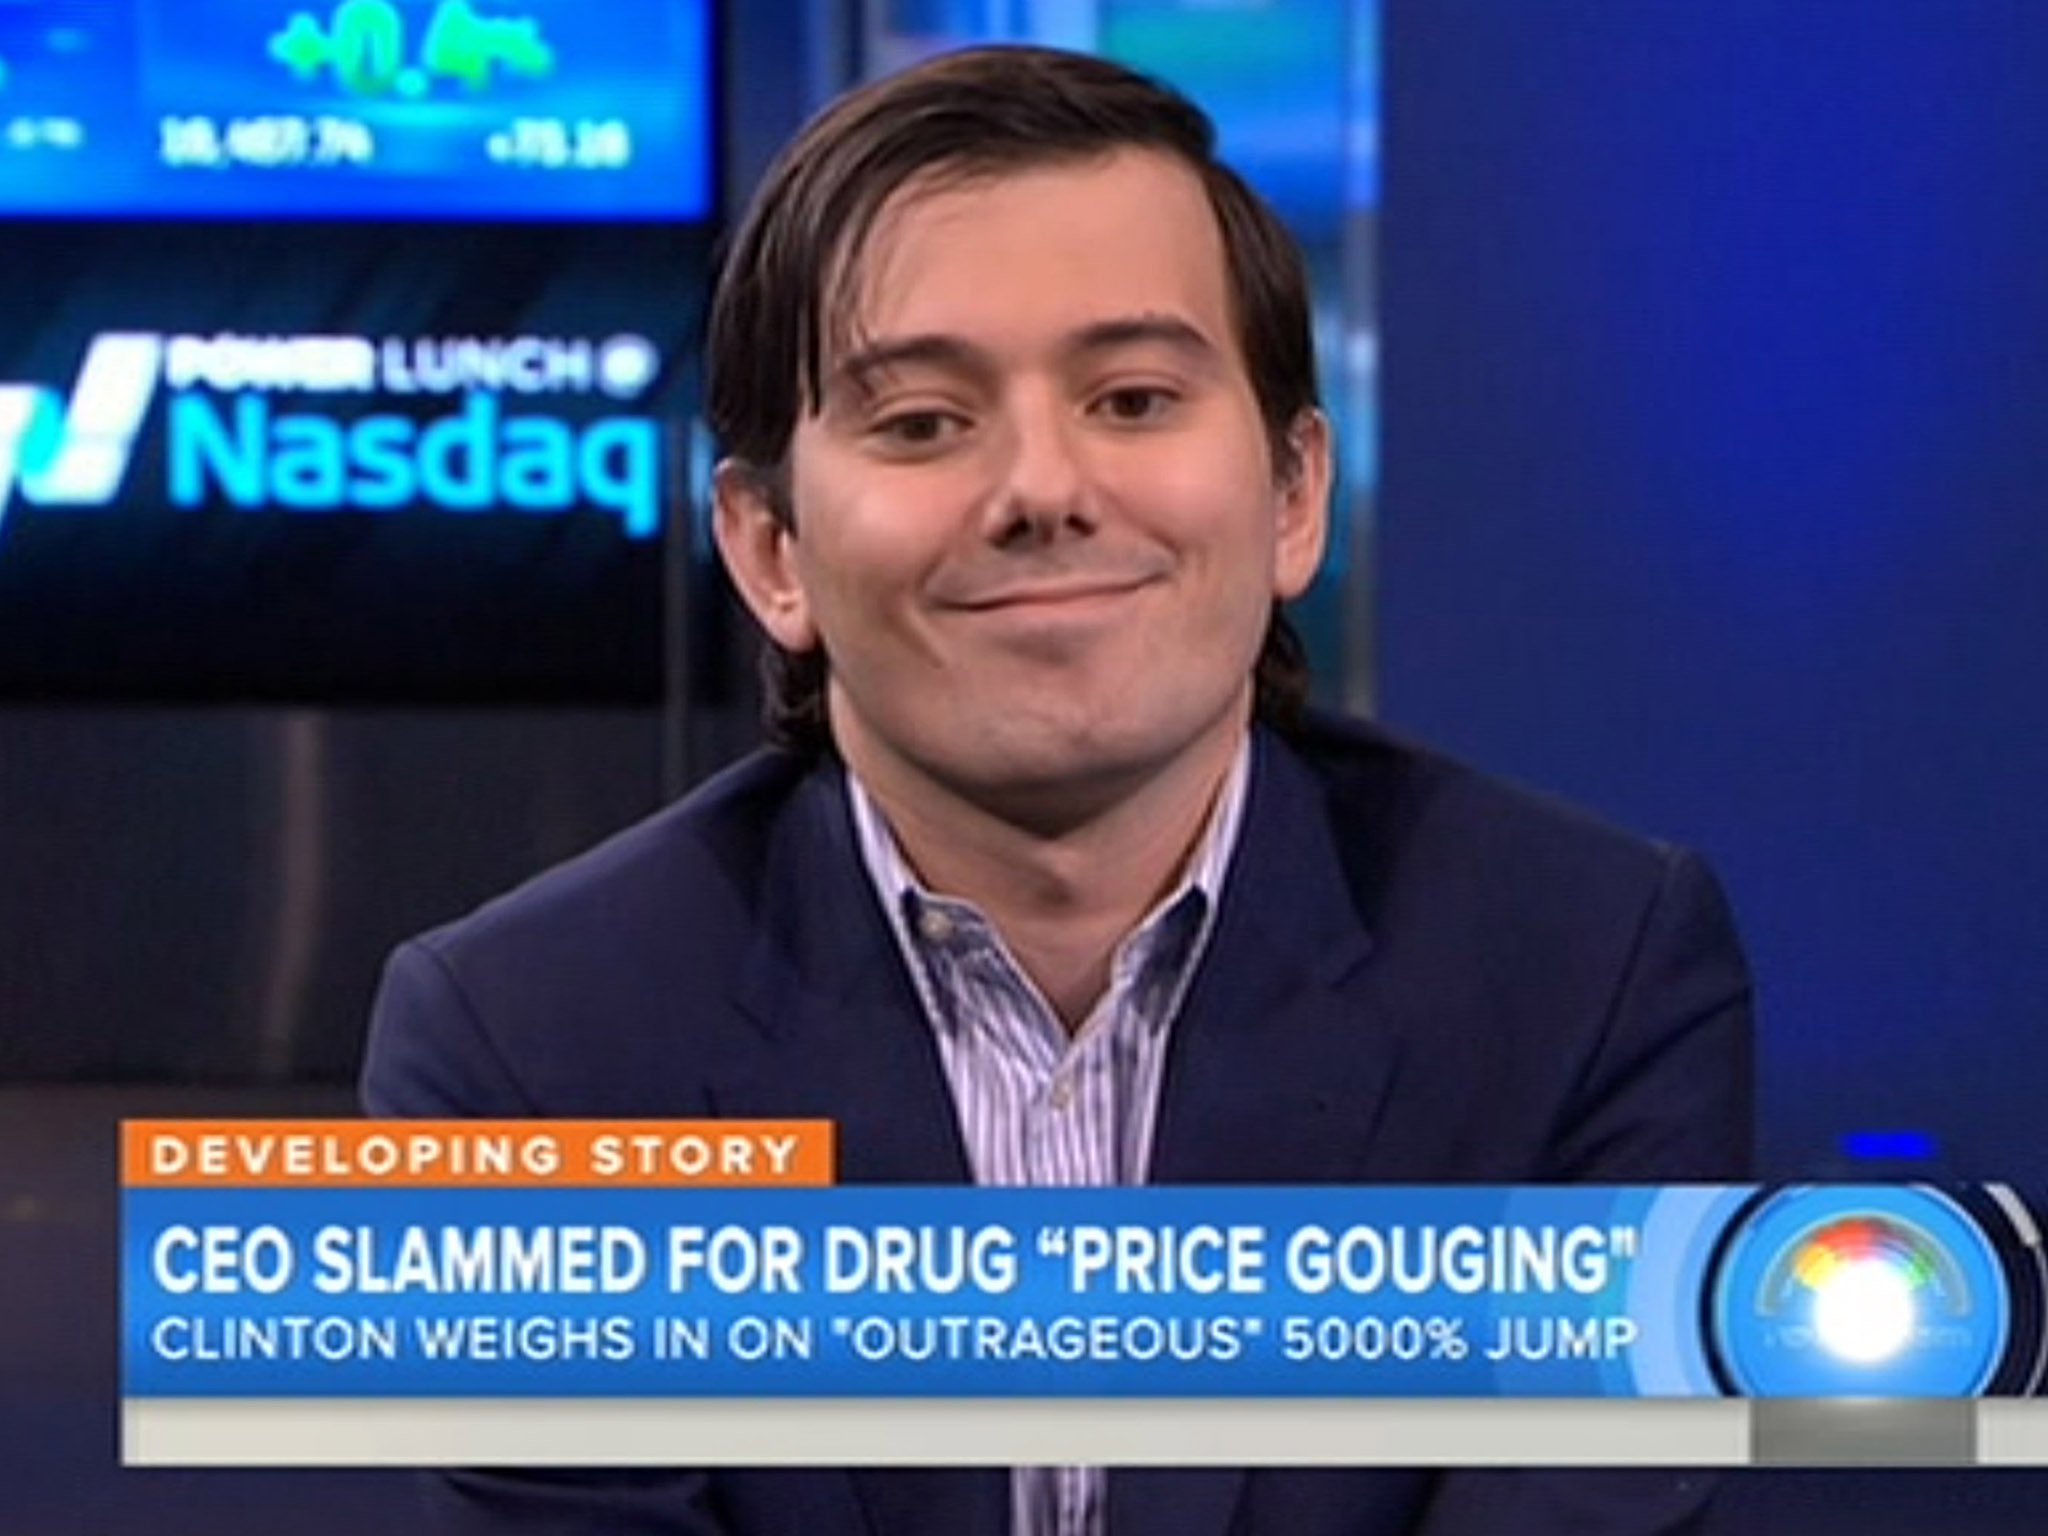 Martin Shkreli is the king of assholes. He purchased the rights to a drug called Daraprim, used in the treatment of both adult HIV patients and infants. Daraprim was originally $13.50 a script. Thanks to Shkreli, the cost is now $750 a pill. He was arrested on securities fraud, but easily made bail. Then he purchased the rights to Wu Tang Clan's "Once Upon a Time in Shaolin", which pissed off GhostFace Killa. But neither Killa, nor the FDA with Daraprim, can do shit about it. Being called "The Most Hated Man in America" means nothing to Shkreli, as America's deregulation acts protect him. This is what results when you make it legal for rich and greedy individuals to buy literally anything, from others' intellectual content to life-saving medicines and treatments. Shkreli now has a yt channel he uploads to nearly every day to brag about his wealth.